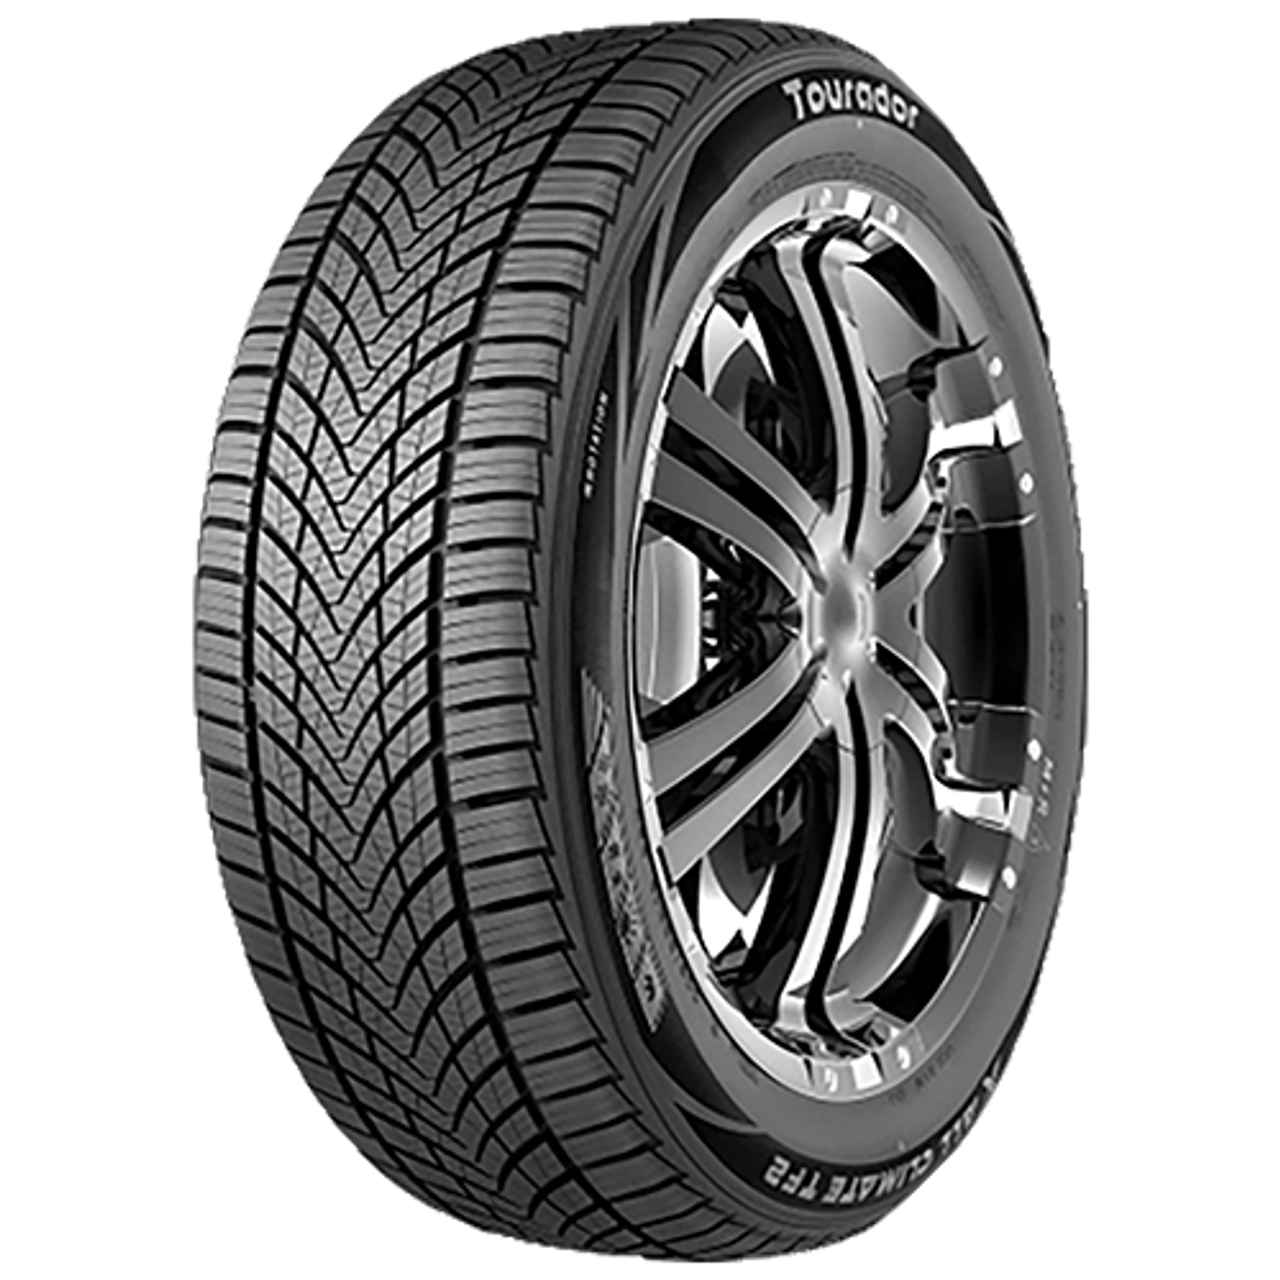 TOURADOR X ALL CLIMATE TF2 235/45R18 98Y BSW